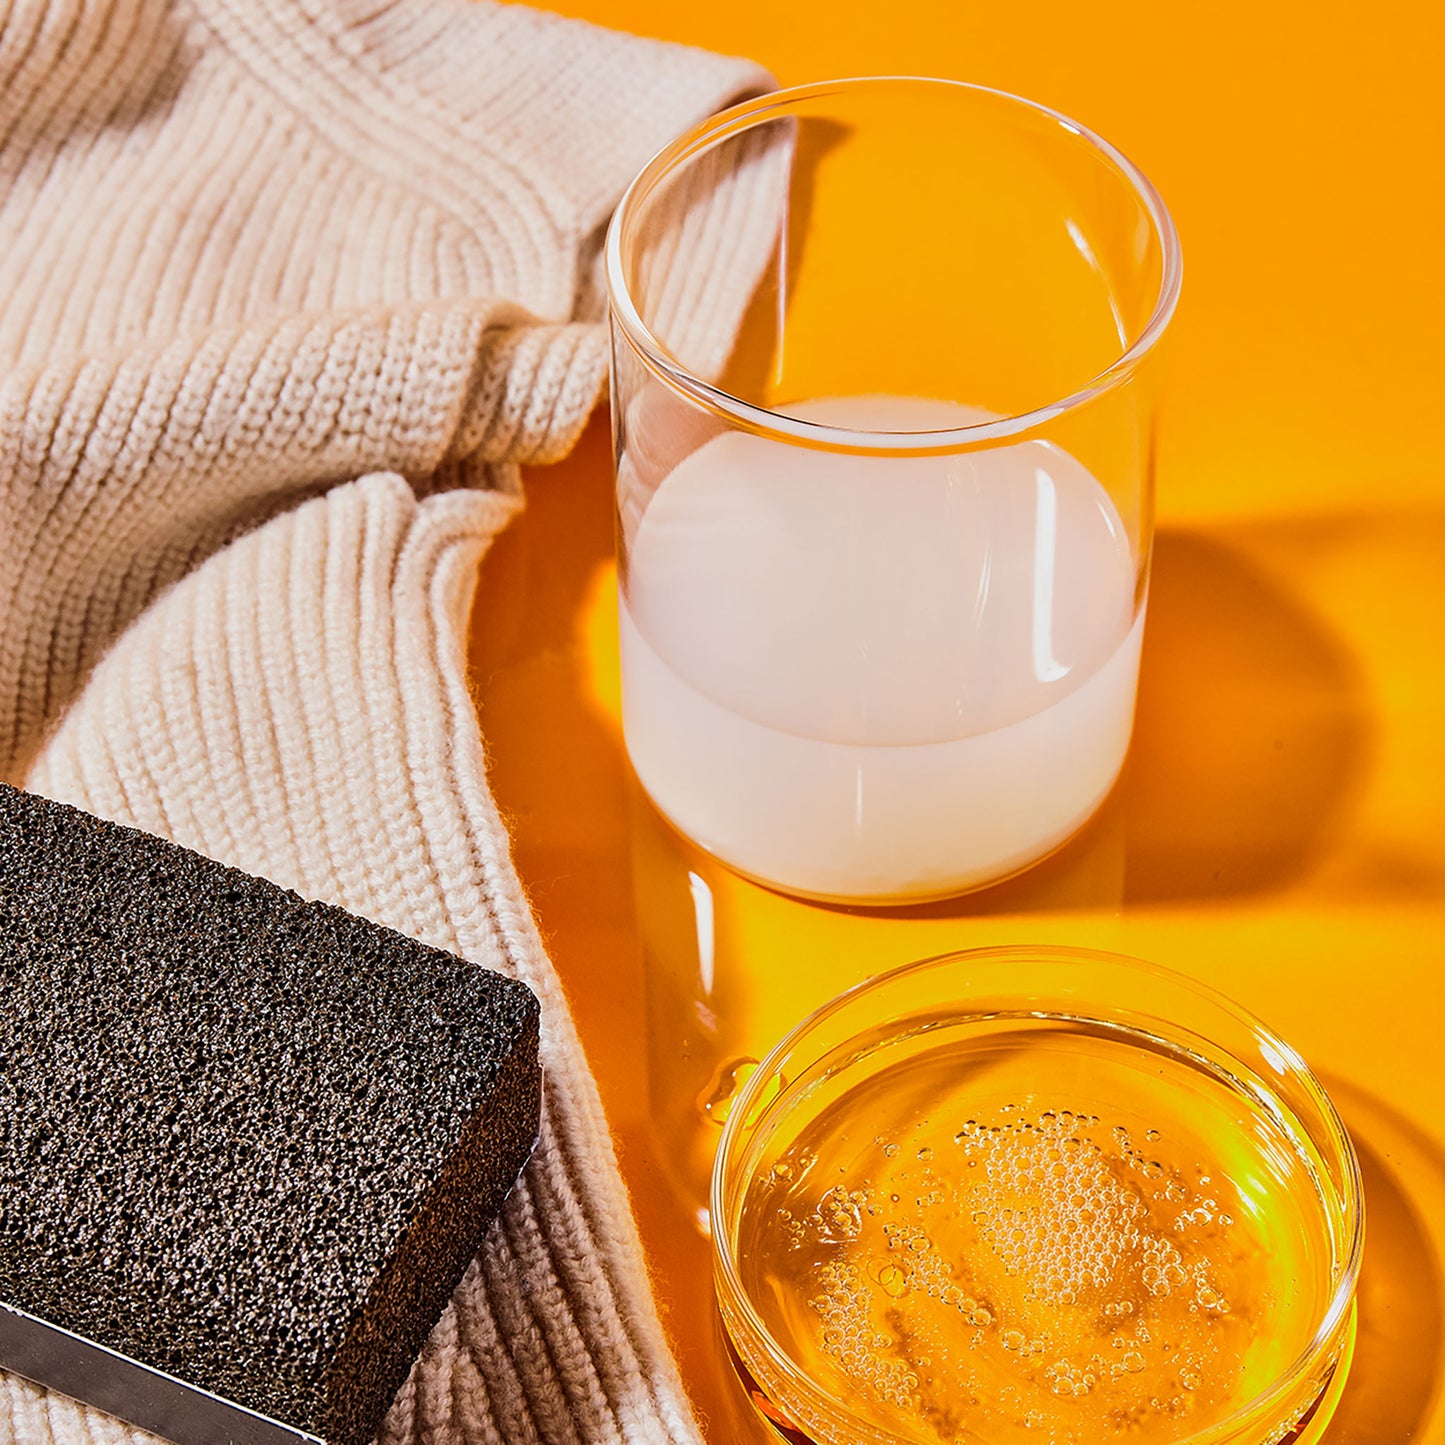 A black depilling "stone" displayed with liquid detergent in a clear petri dish, wool conditioner in a clear glass, and a beige knit sweater